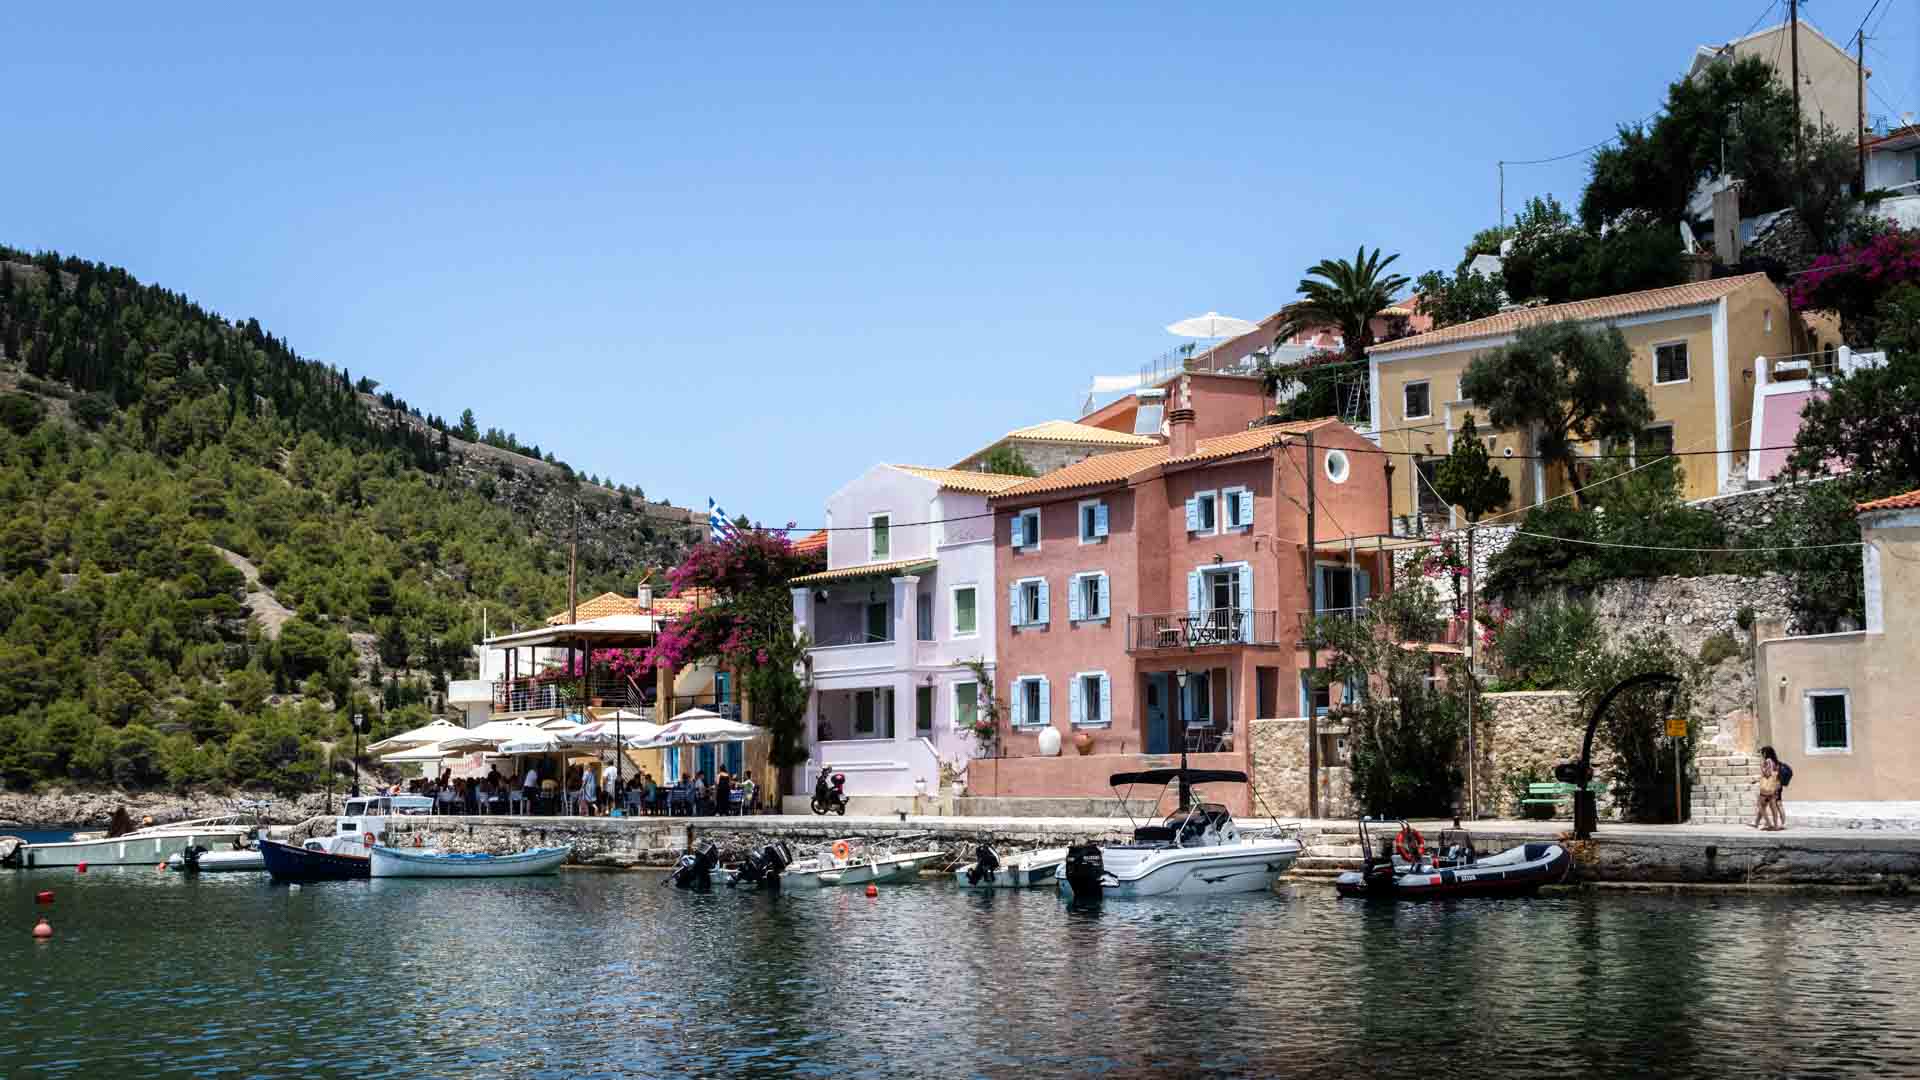 How To Get To Kefalonia – By Air or Sea?